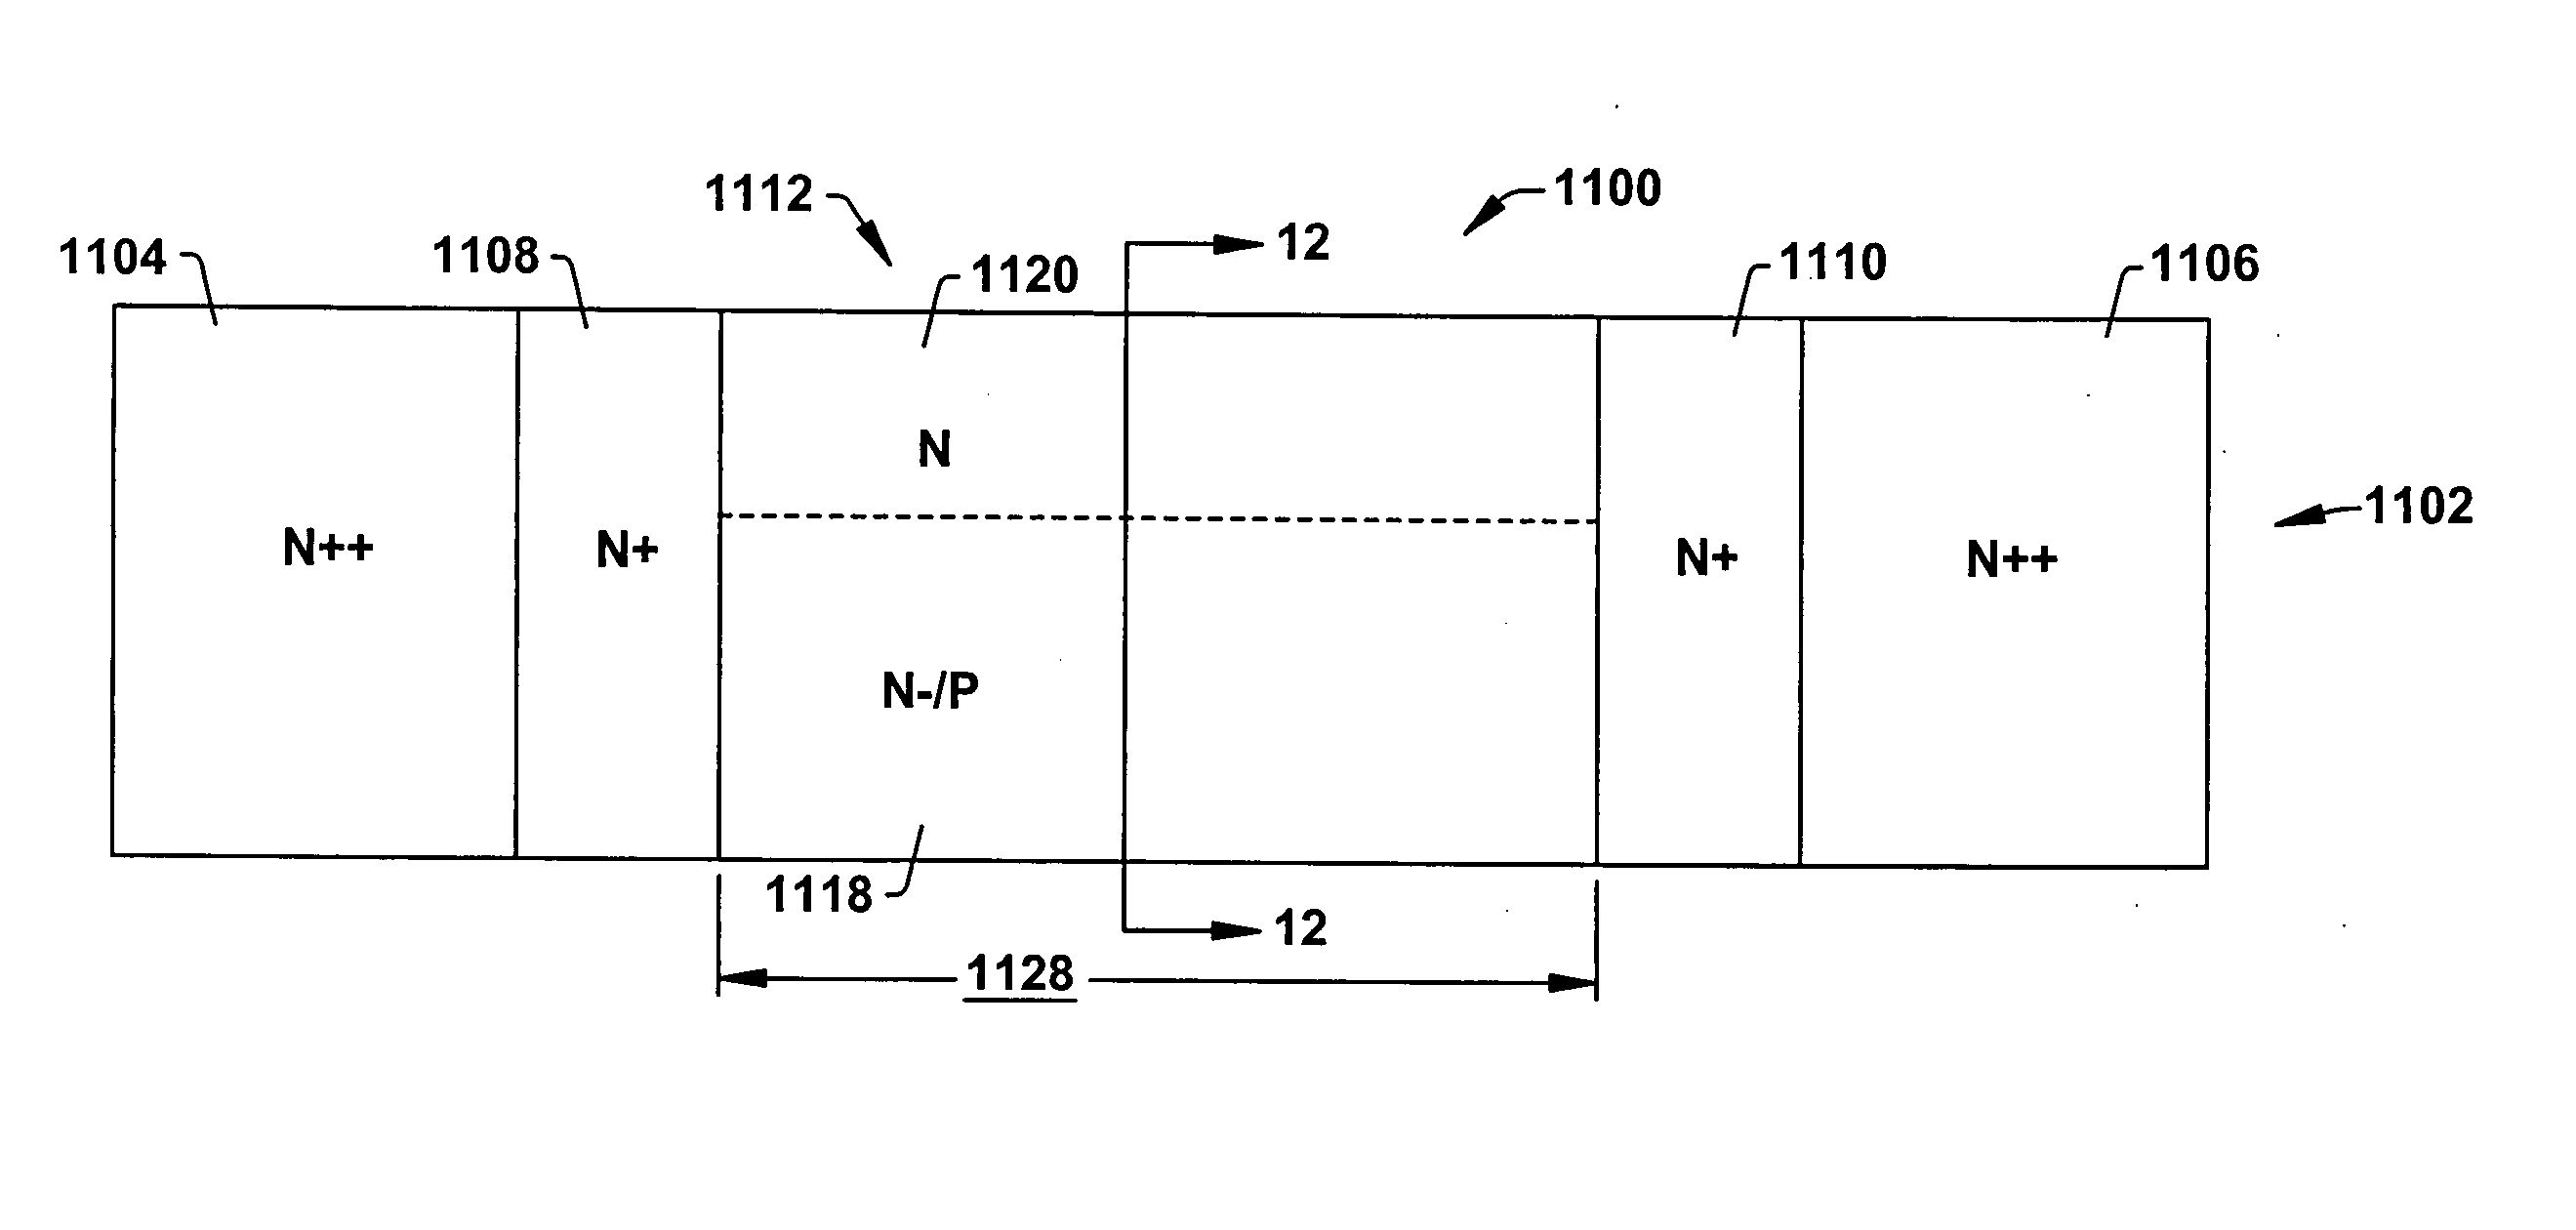 Short channel semiconductor device fabrication